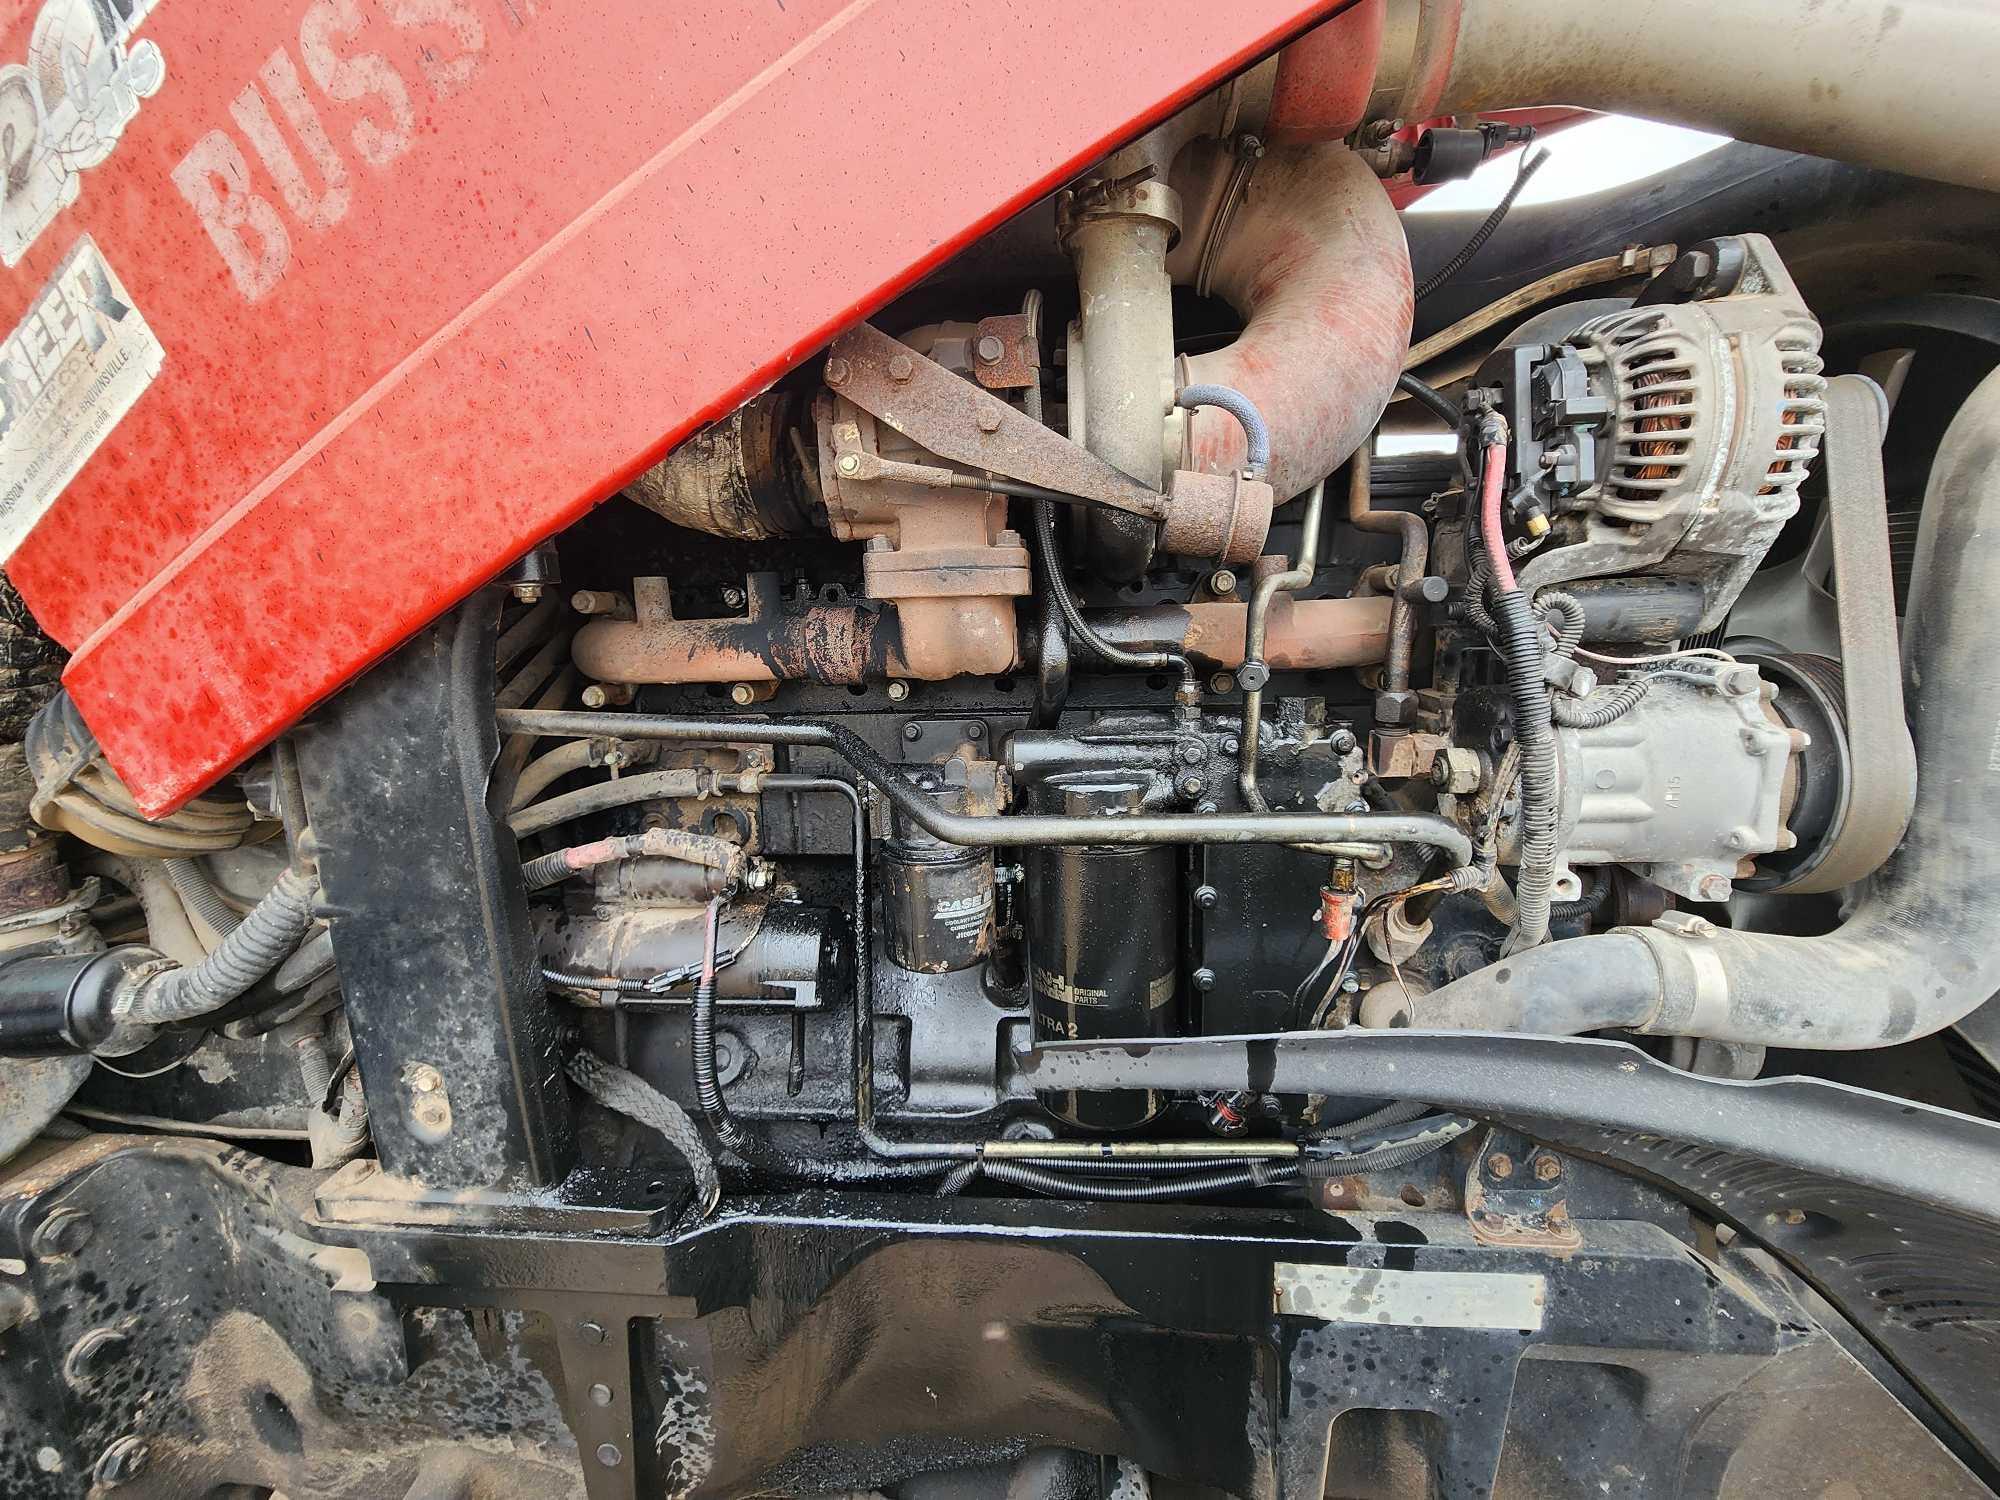 Case IH 275 Tractor